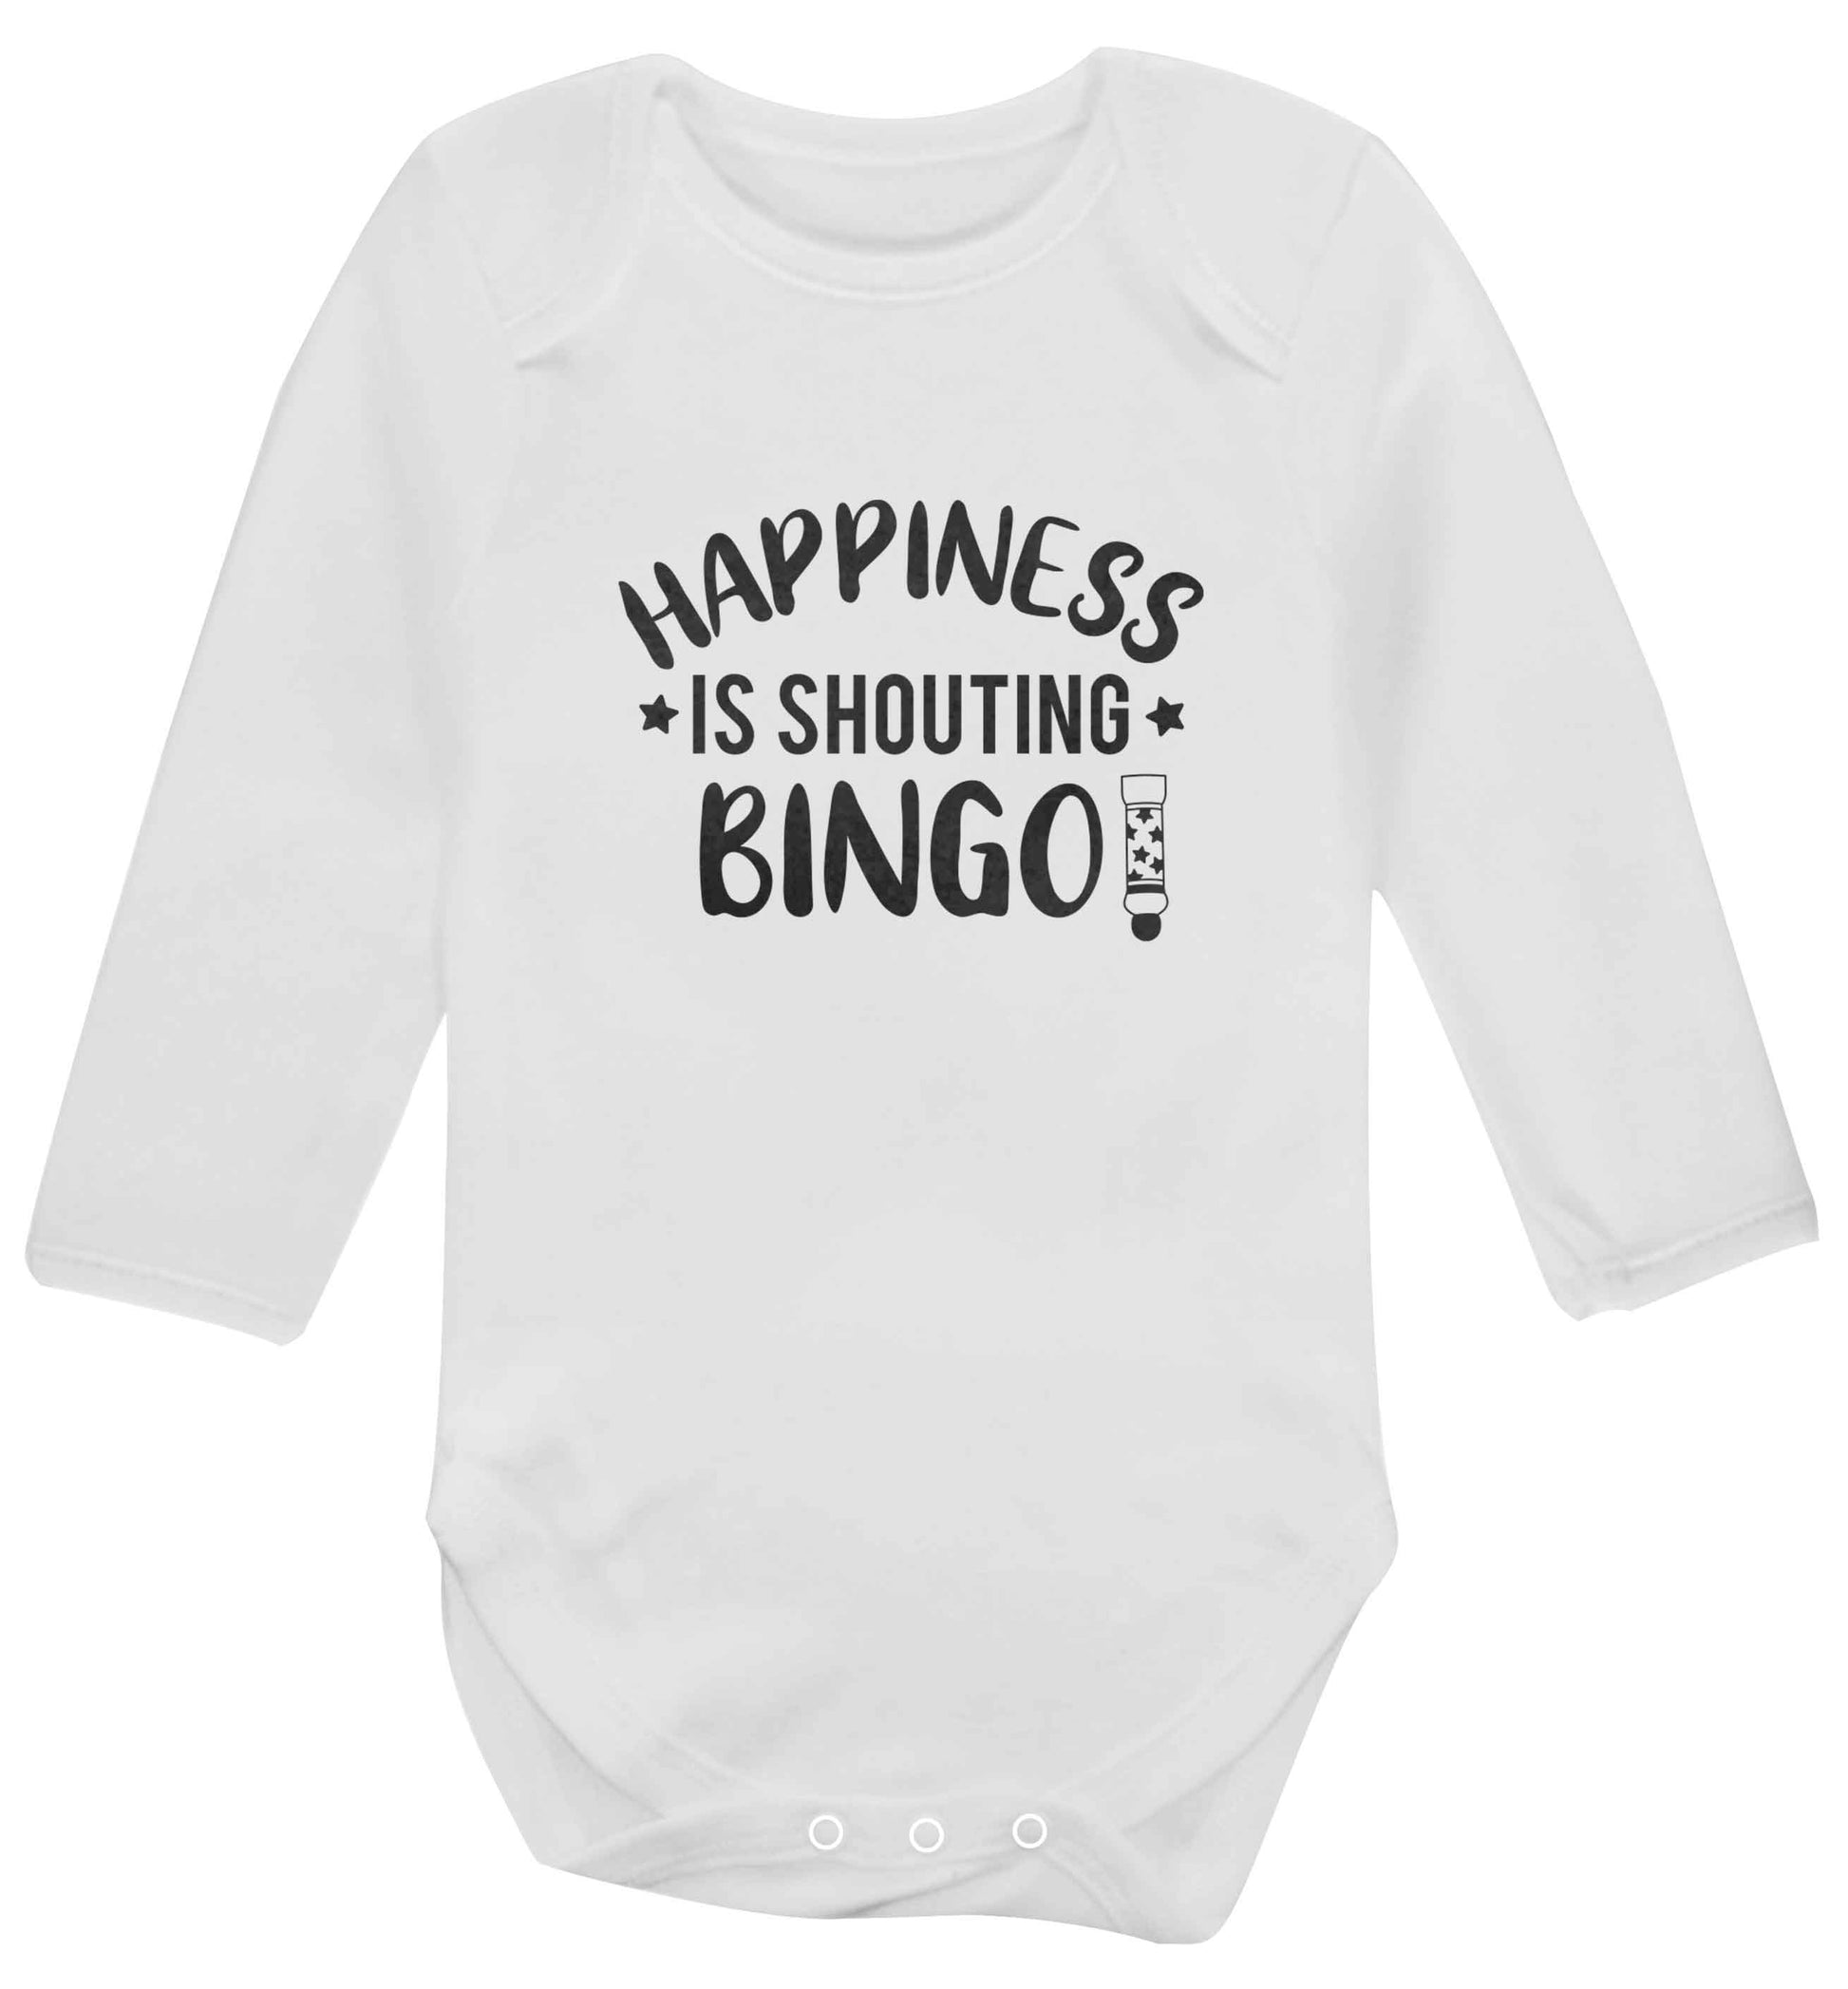 Happiness is shouting bingo! baby vest long sleeved white 6-12 months